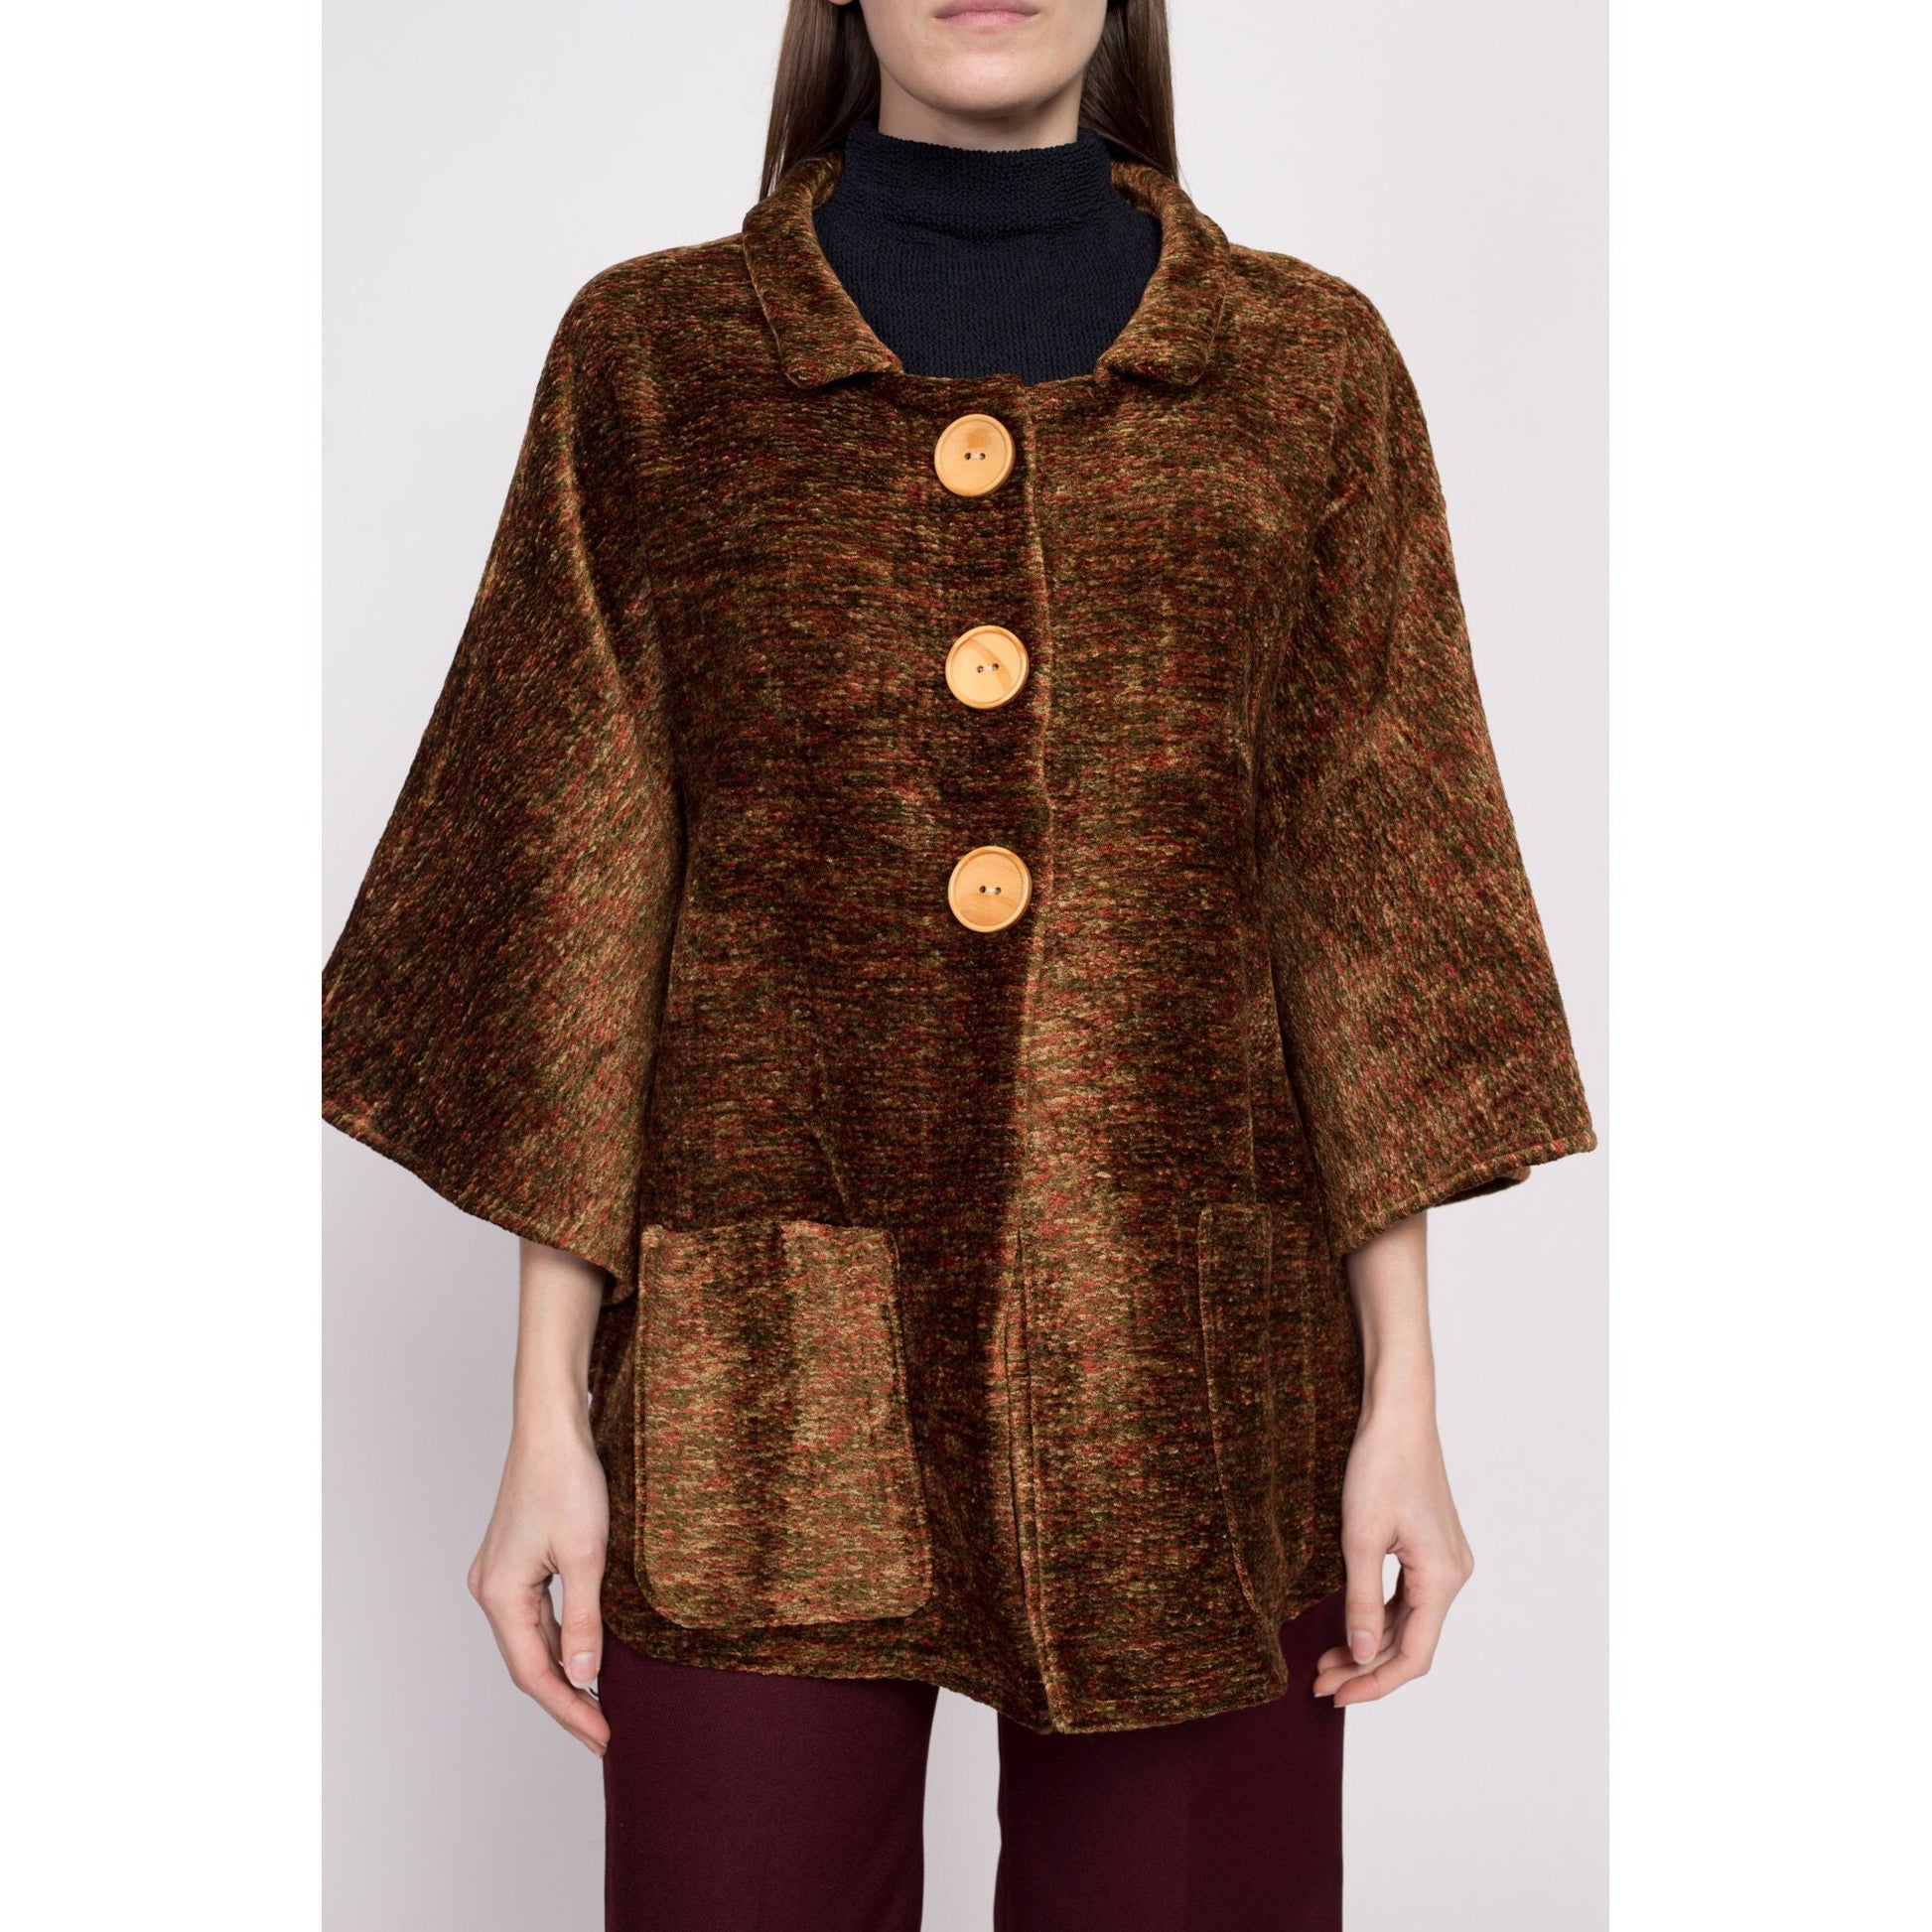 Vintage Plush Tapestry Cape Coat - One Size